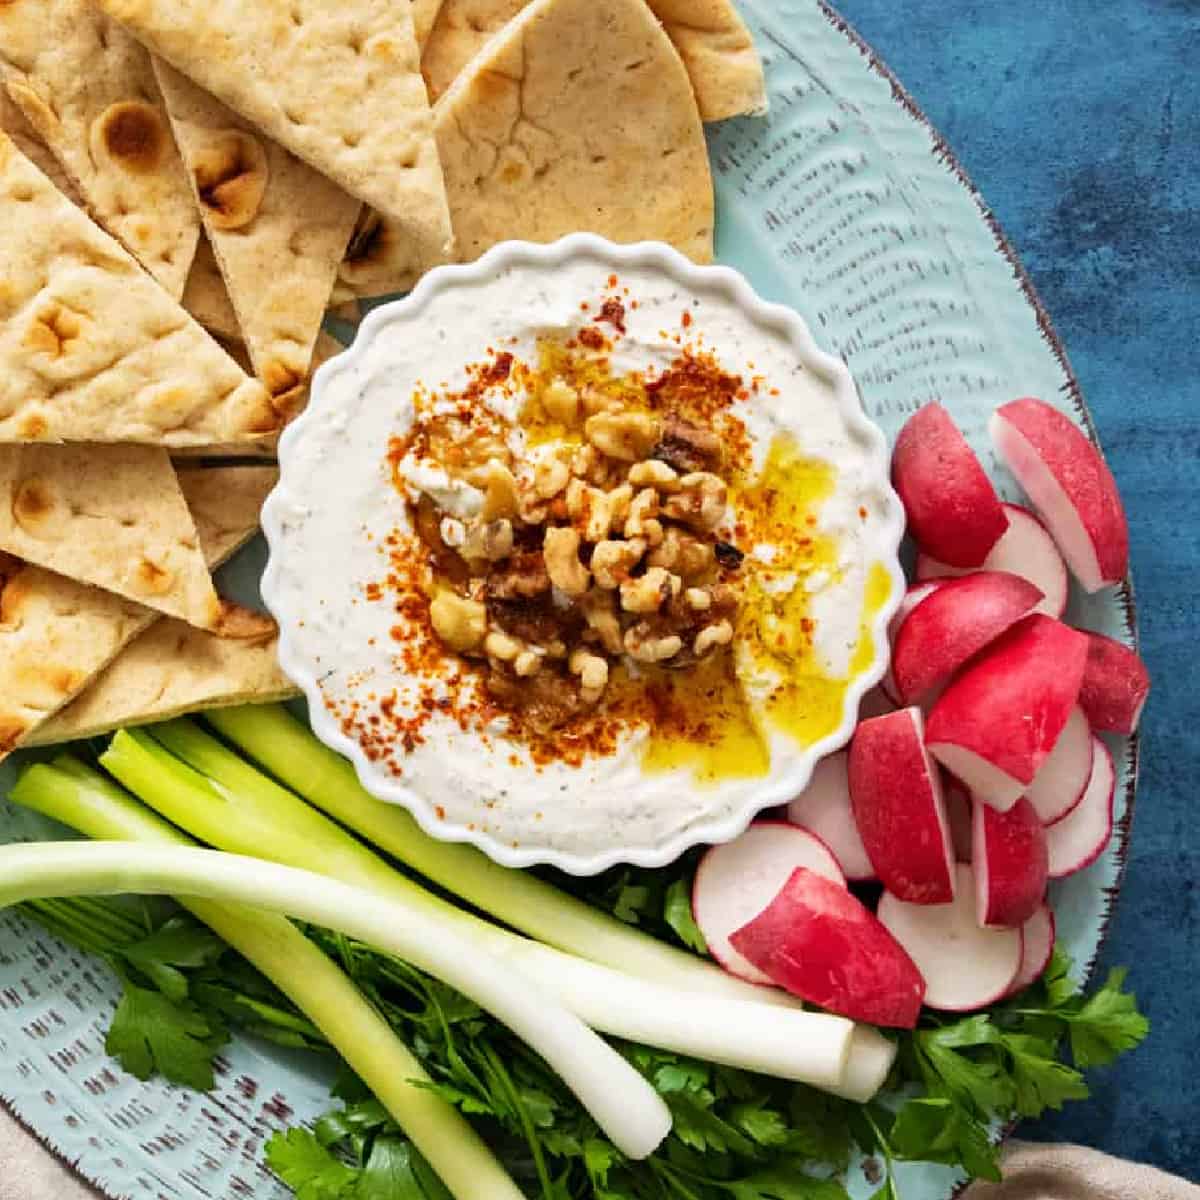 Ready in 10 minutes, this creamy whipped feta dip is super easy and tasty. Top with walnuts and serve with pita for a unique mezze at any gathering! Follow along to learn about which feta to select and how to make the best feta dip ever!
